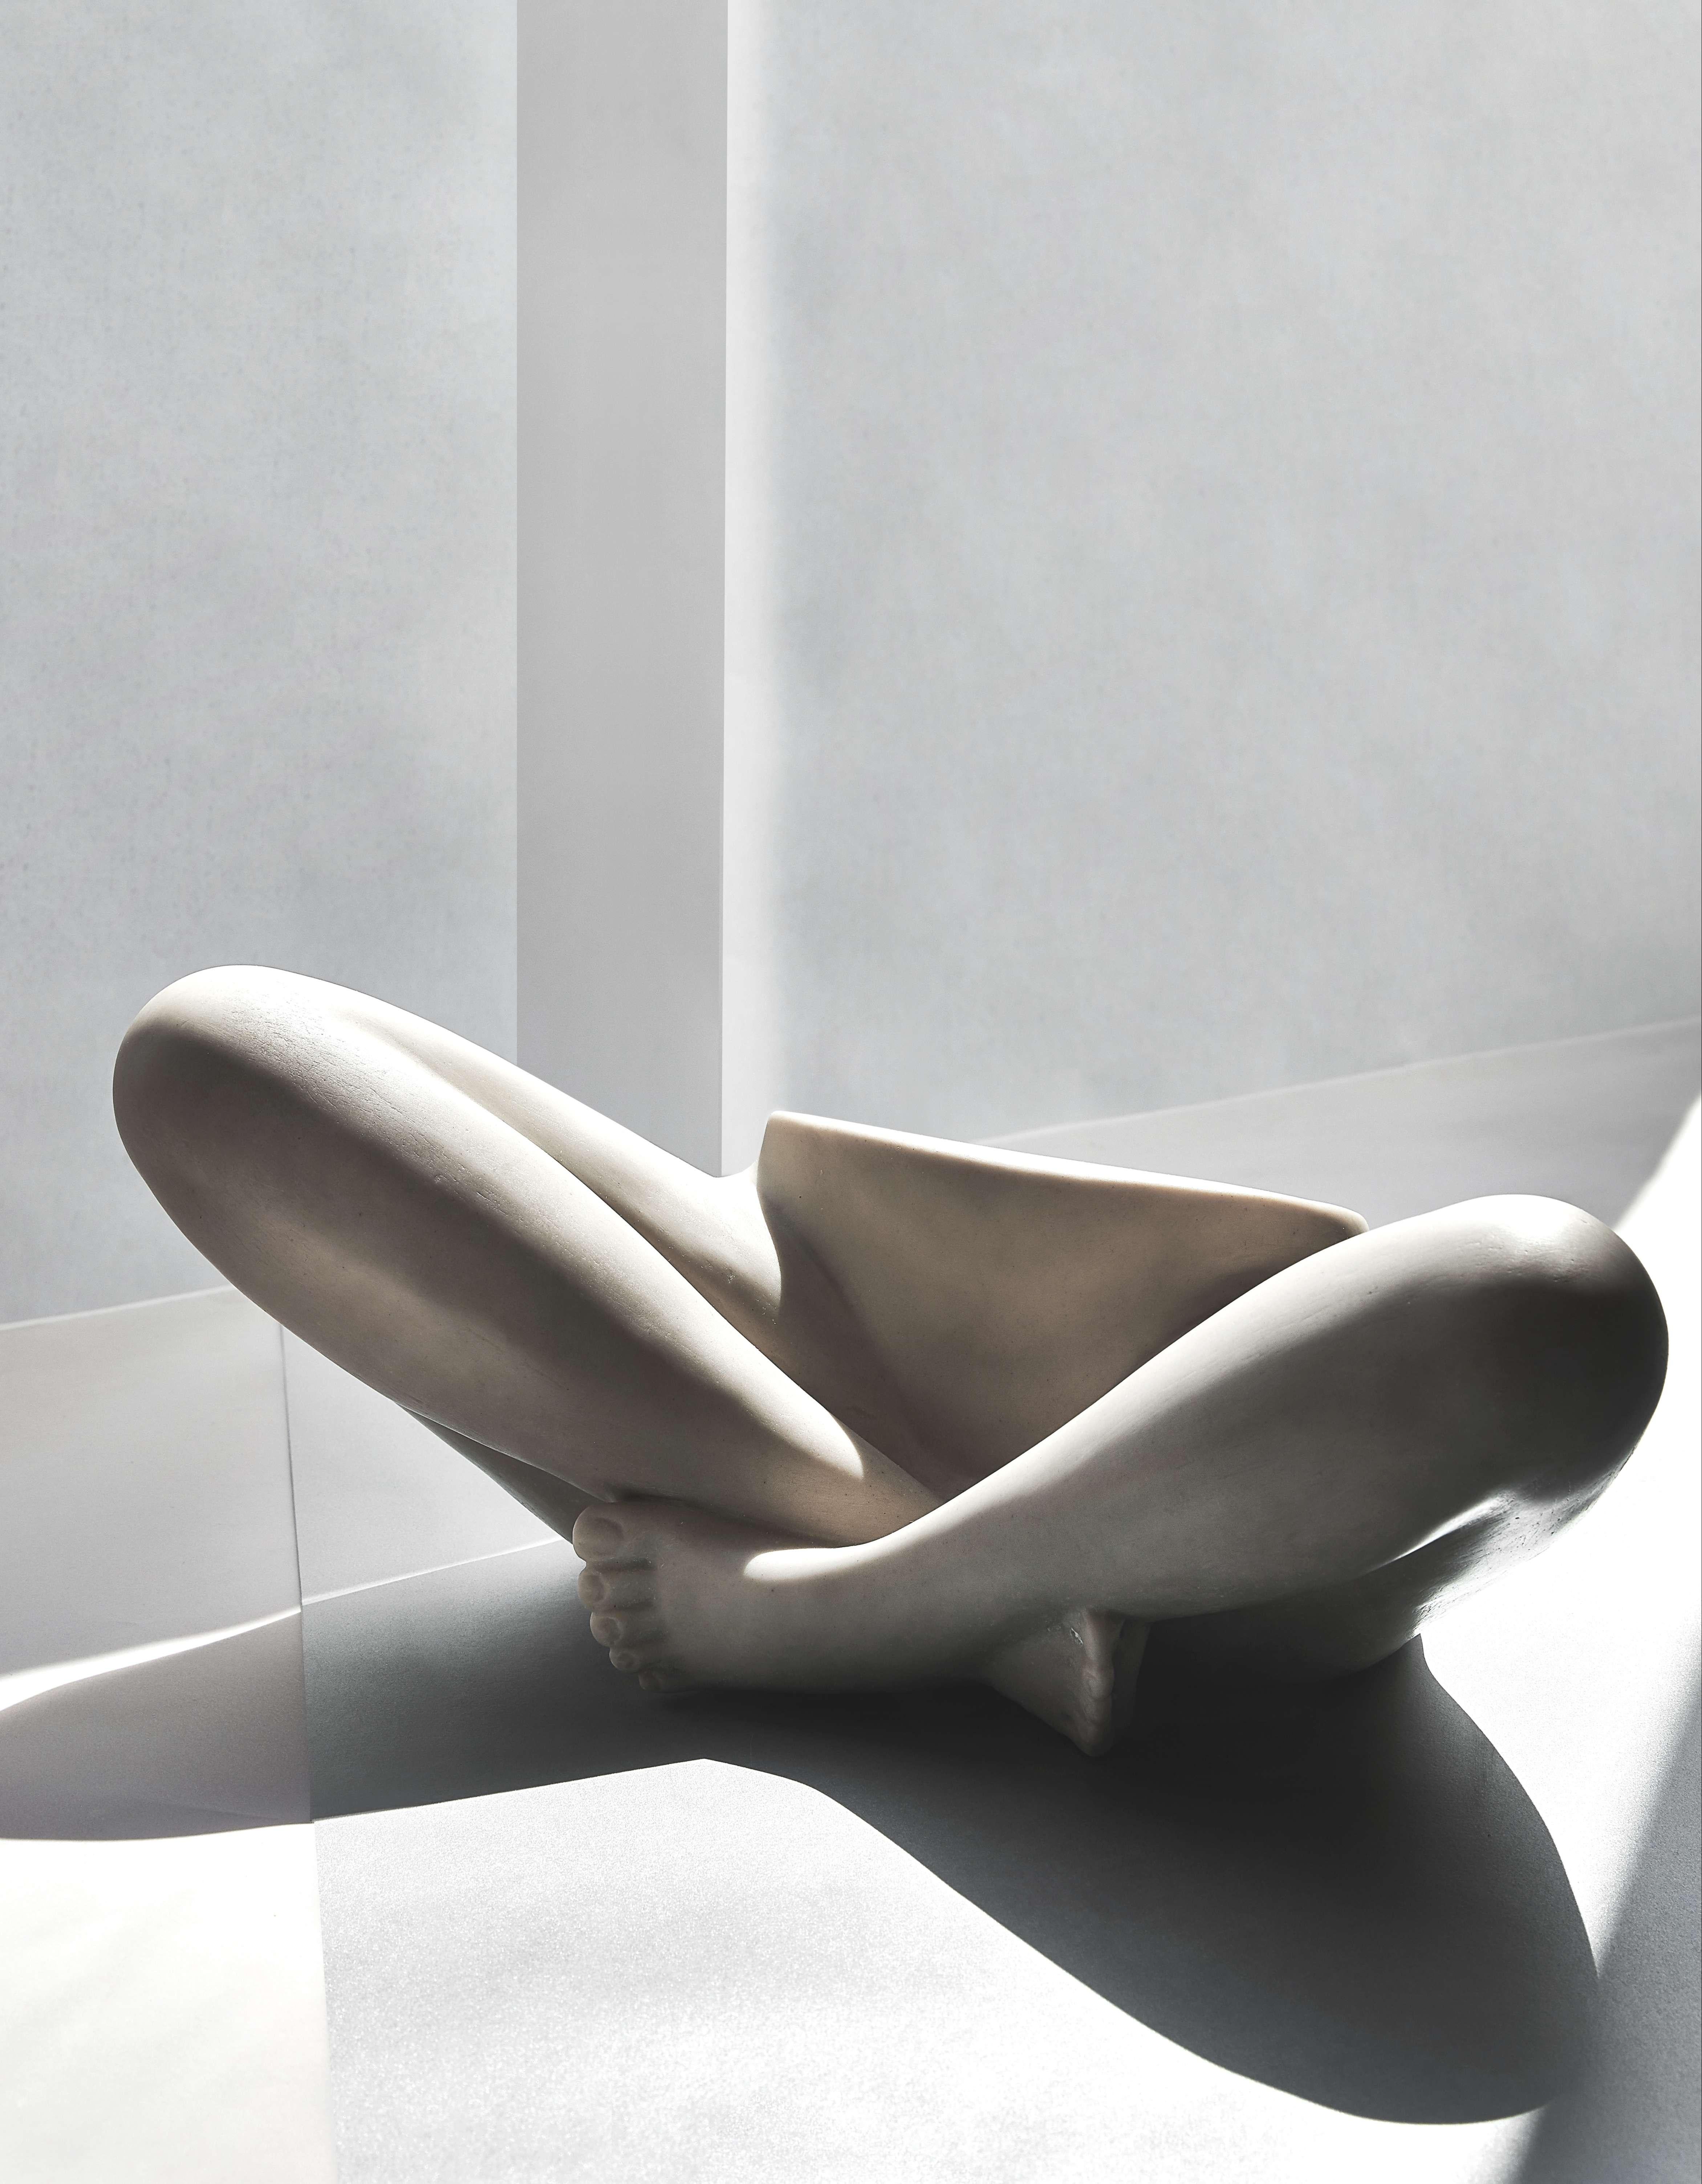 Our Sukhasana sculpture is inspired by the calming pose commonly used for meditation and practicing breathing exercises. 

This collection is inspired by the seducing form of the human body. Pieces that speak for themselves. The pieces in this